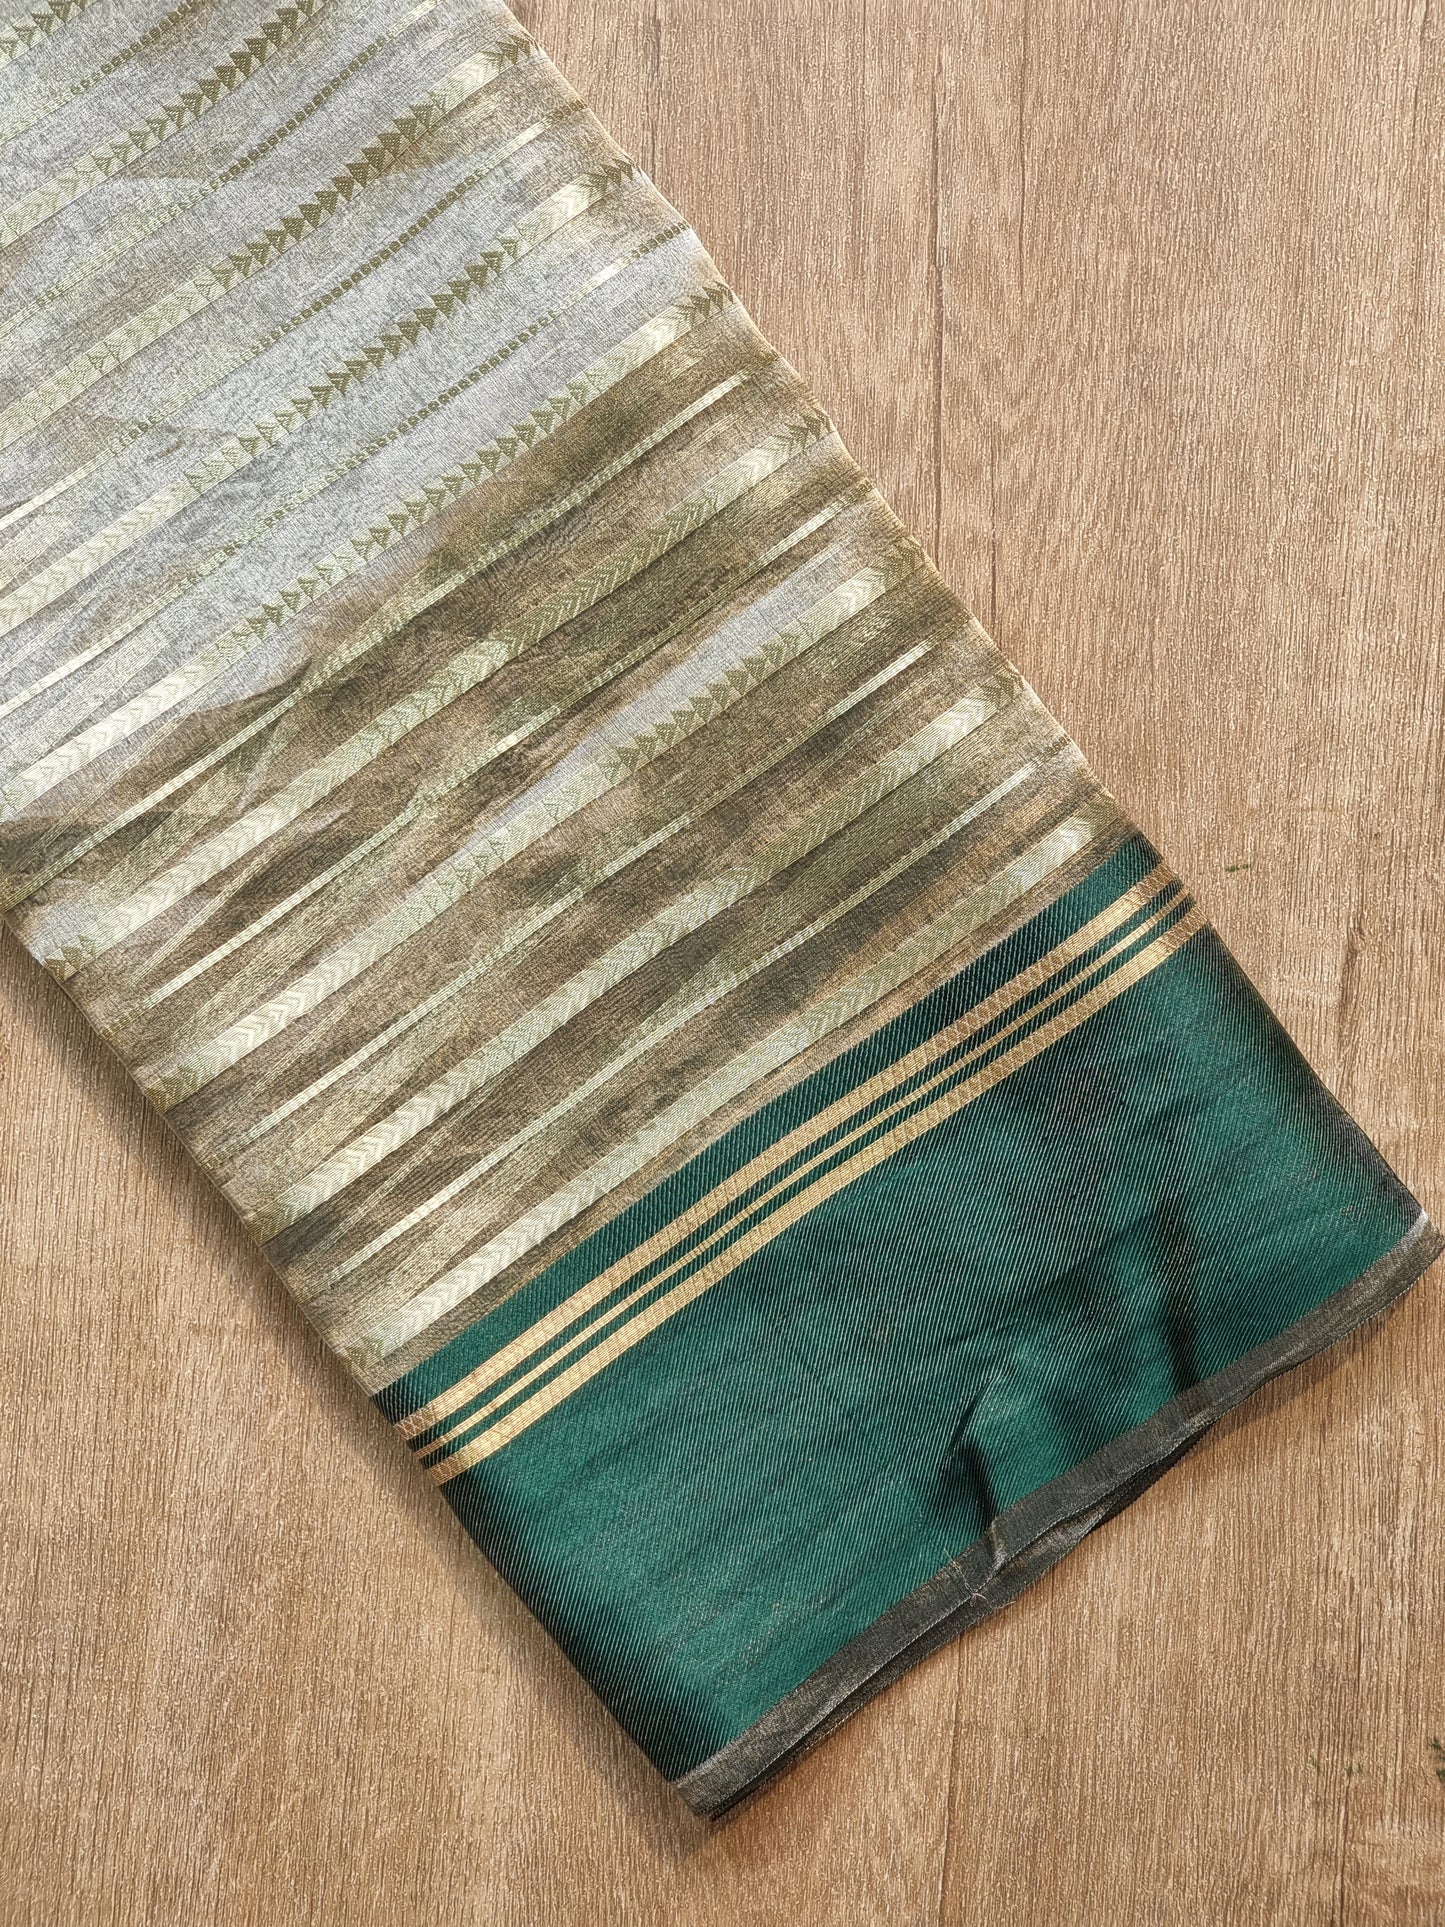 Pure Metallic Tissue Silk stripe saree with Katan silk border and special tassels with blouse sleeves